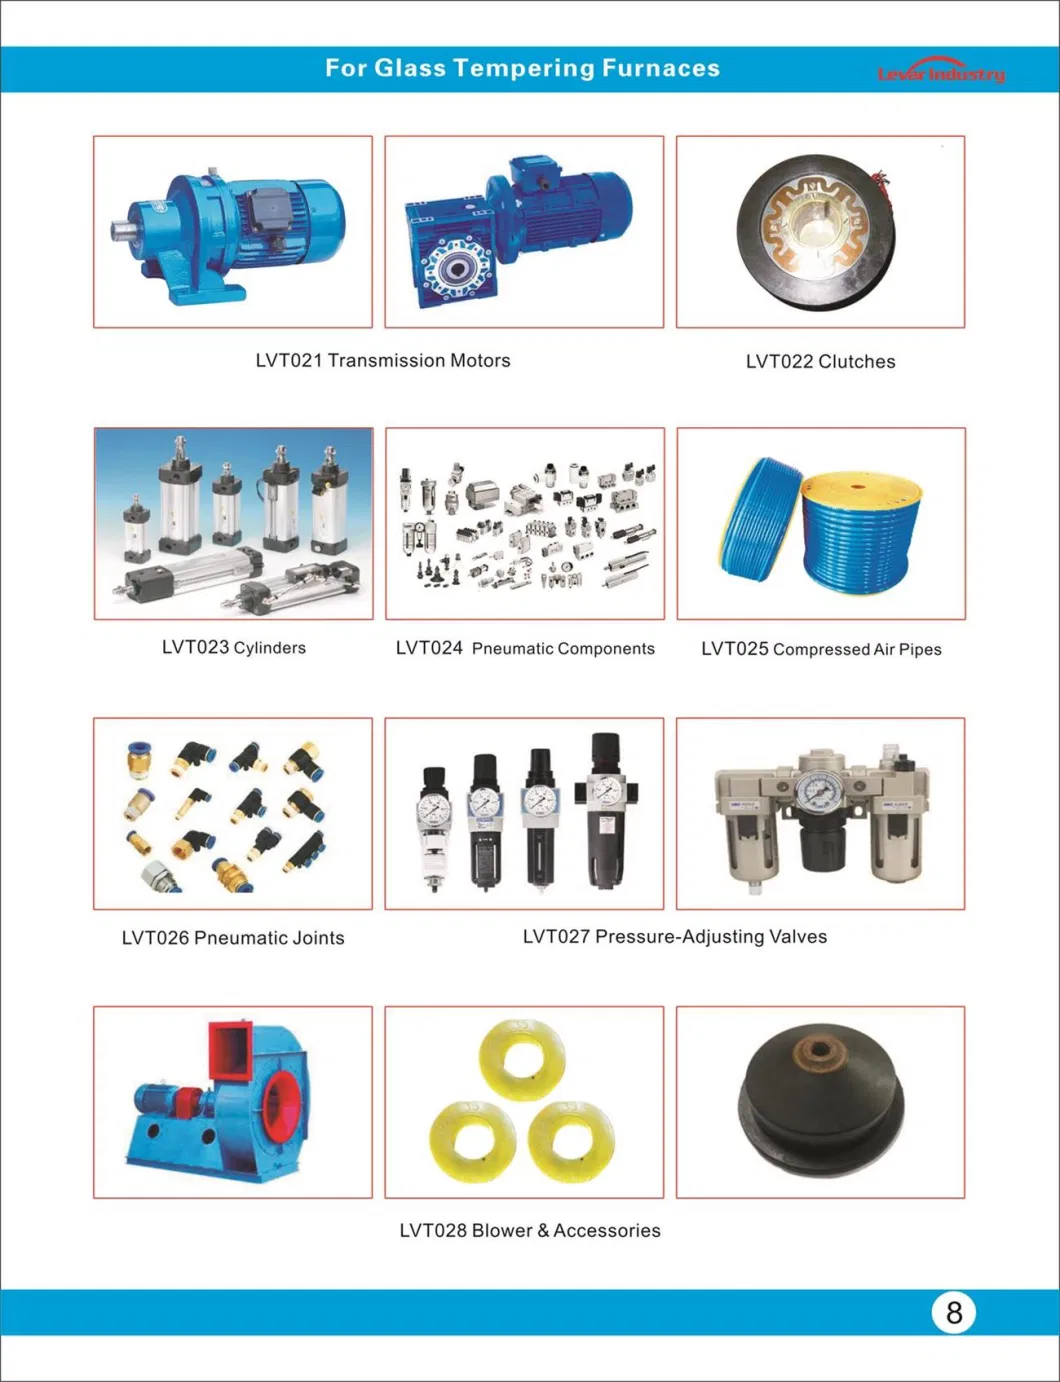 Spare Parts for Glass Tempering Furnace, Glass Tempering Furnace Spare Parts